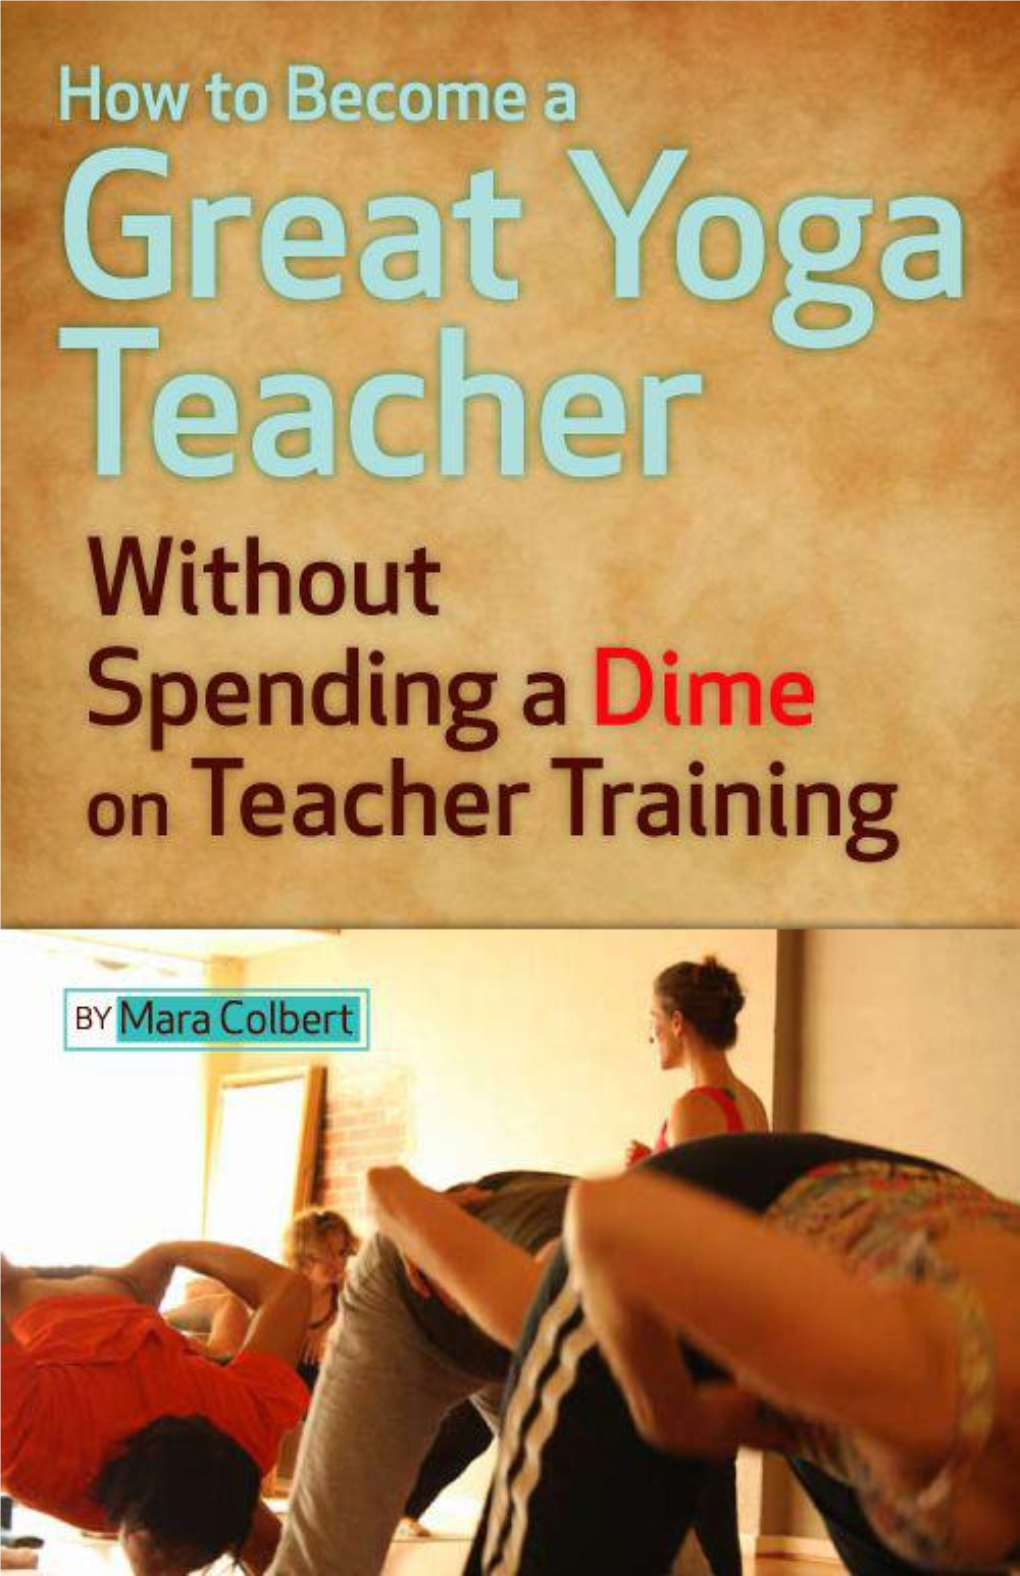 How to Become a Great Yoga Teacher Withodime on Teacher